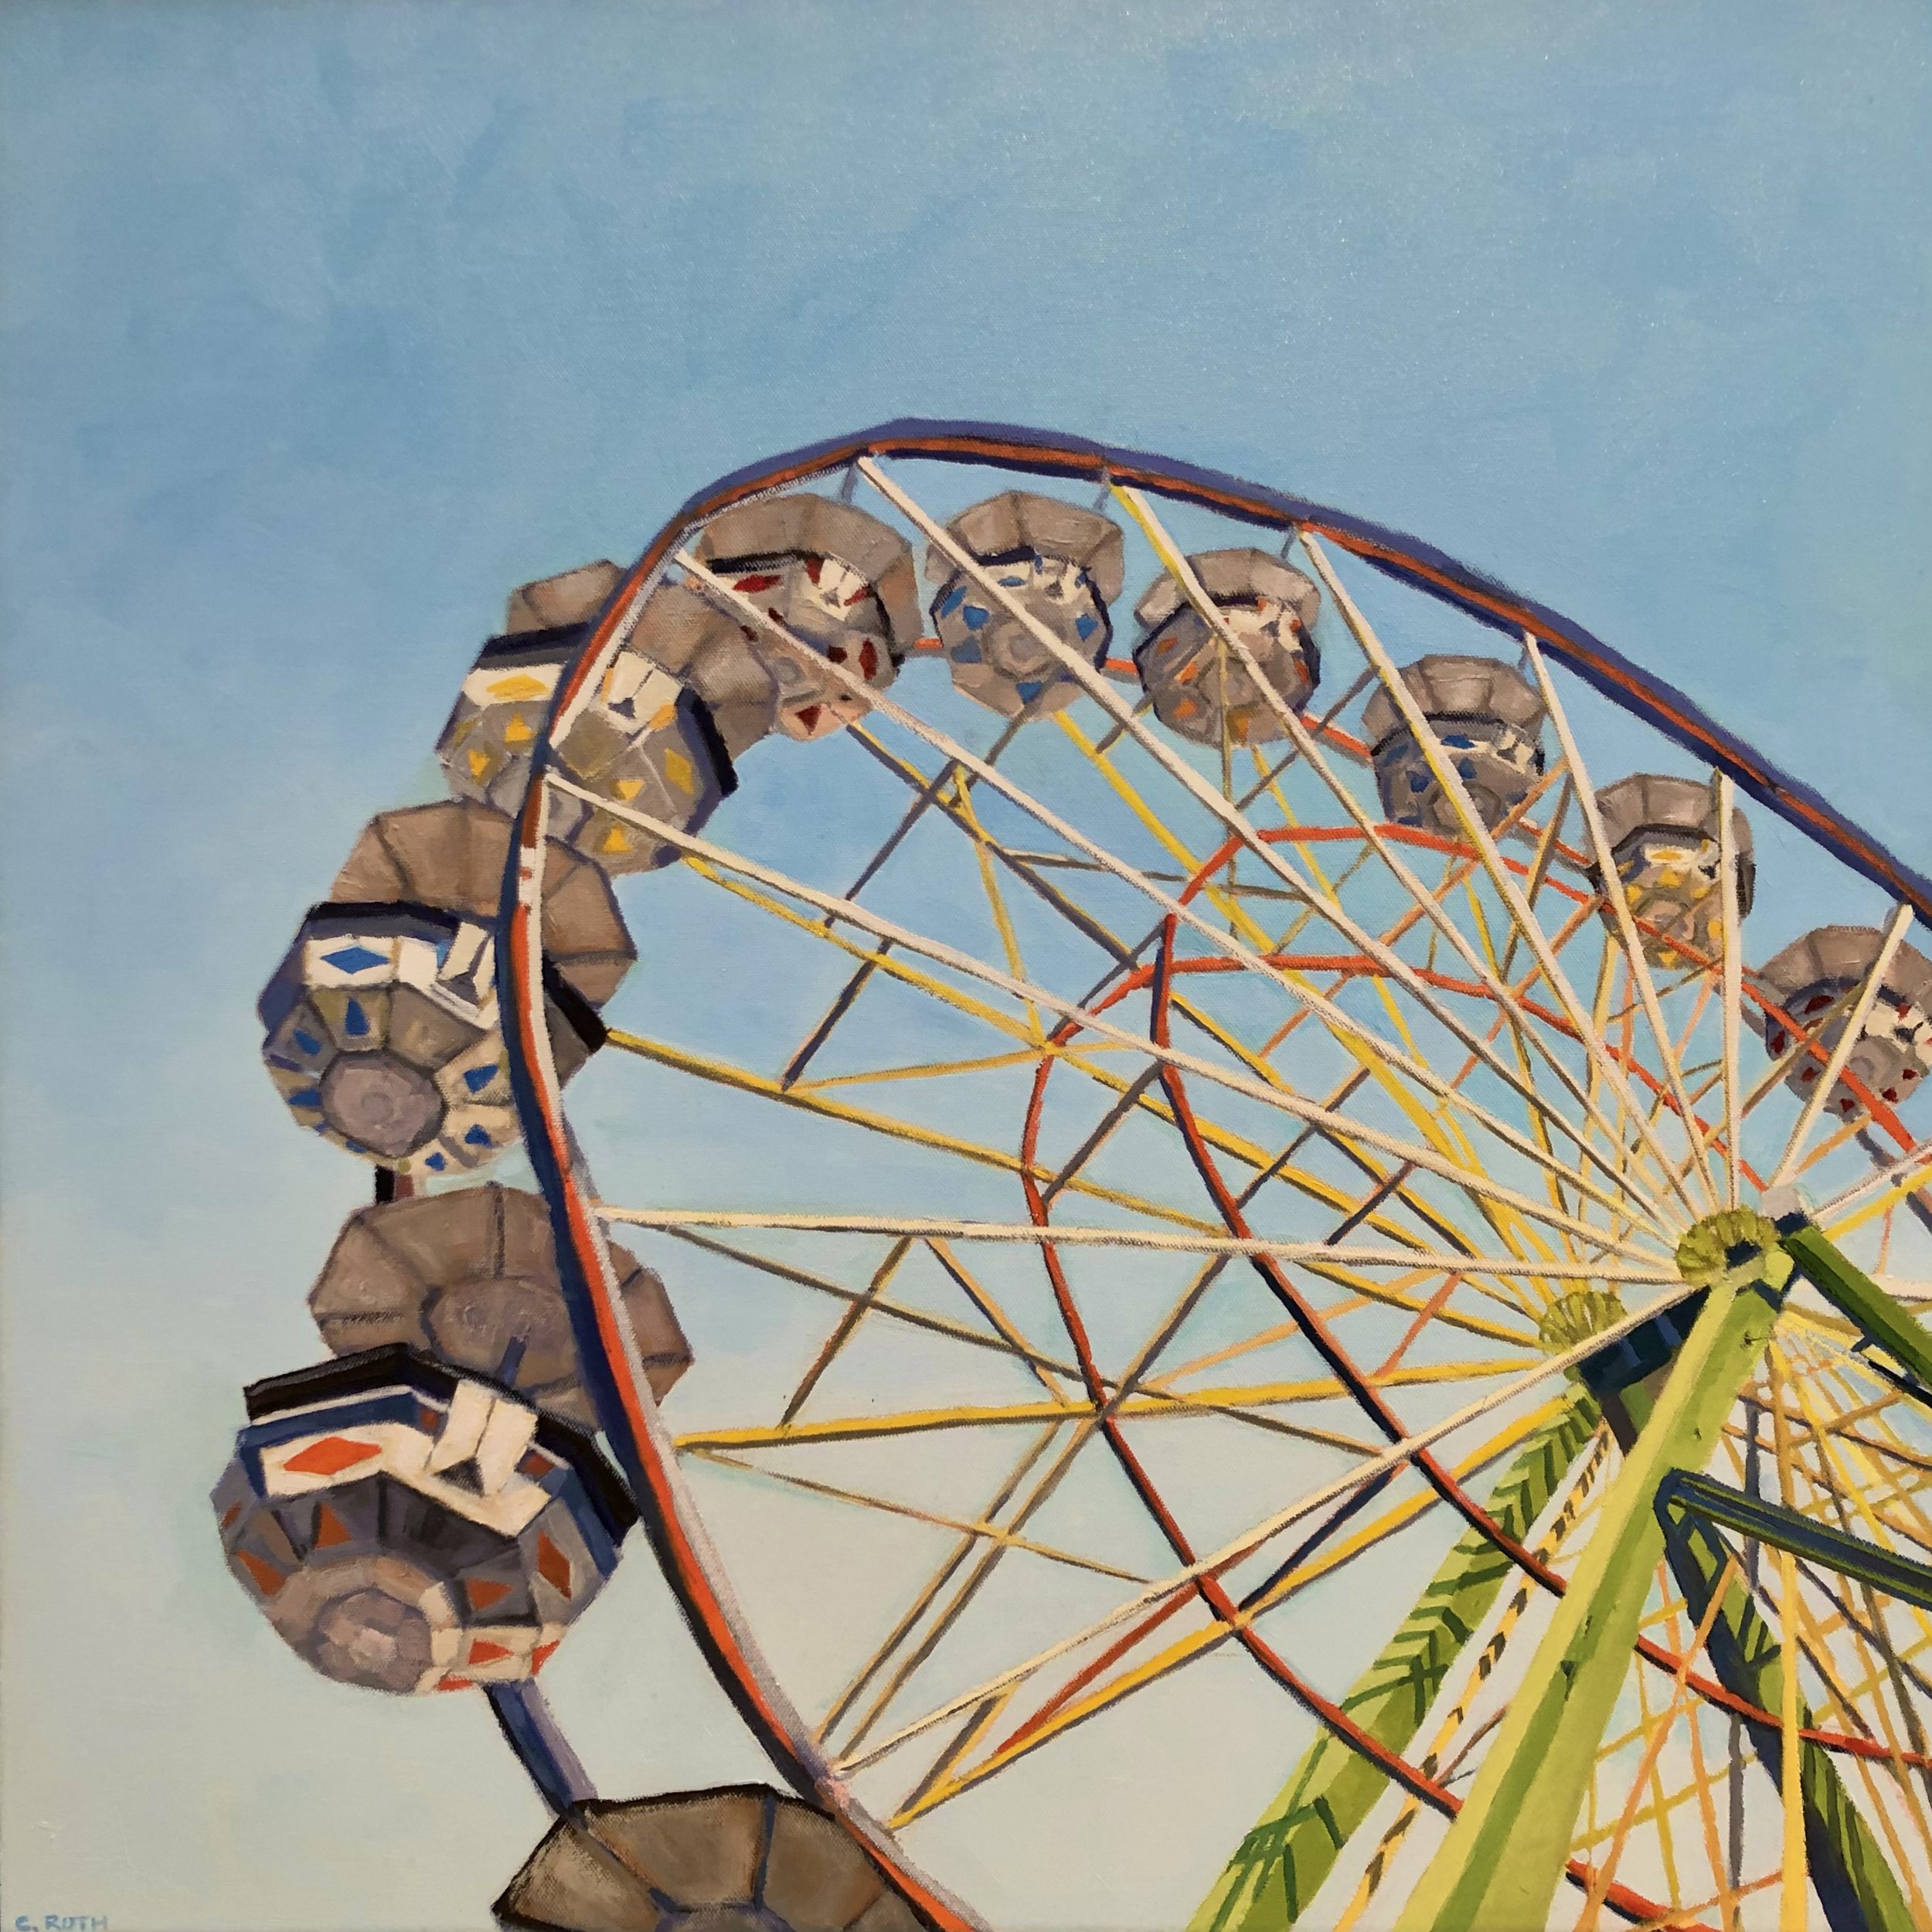 First Ride at the Fair by Carla Roth